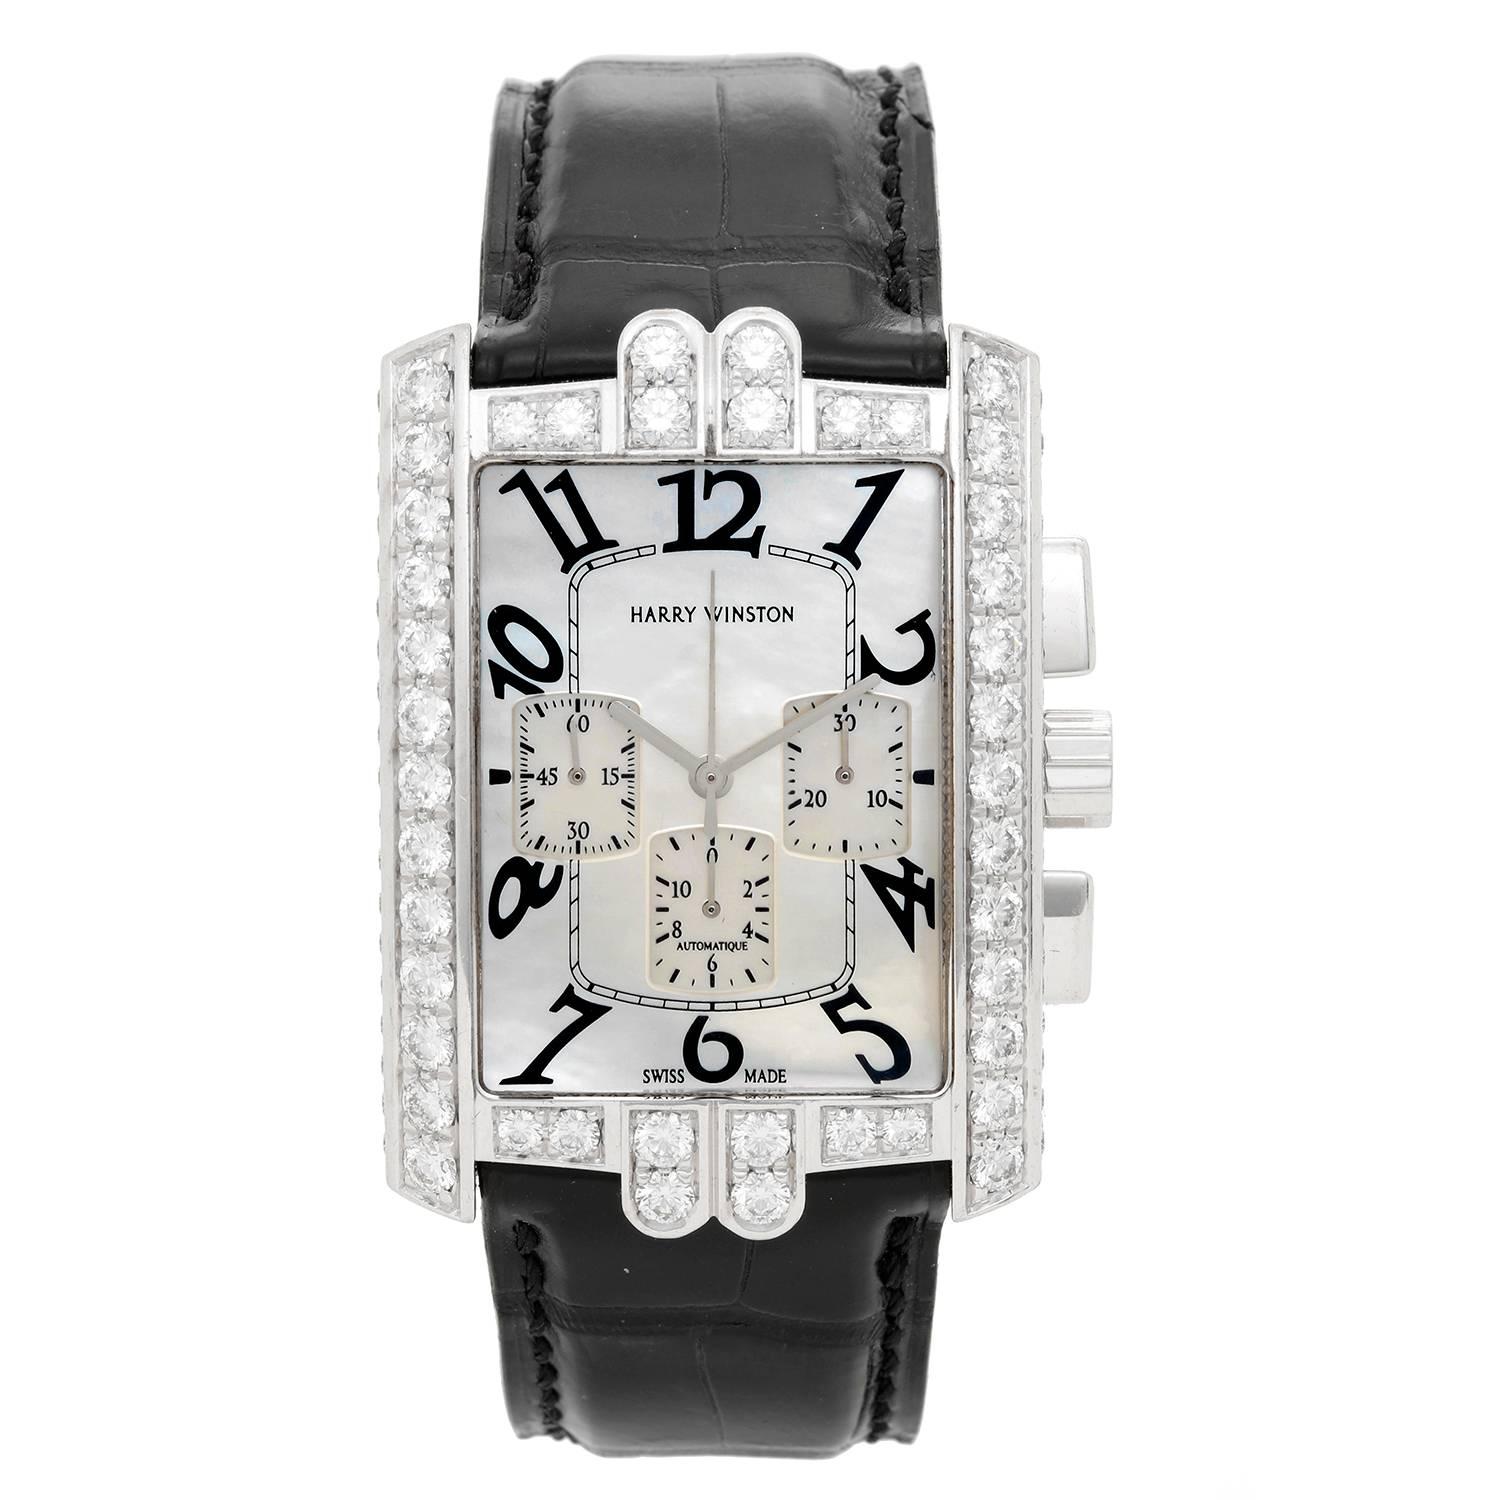 Harry Winston Avenue C Chrono Watch AVCACH32WW006 -  Automatic. 18K White Gold with 5.58 cts of pave diamonds around bezel, case, crown and buckle. White Mother of Pearl. Black alligator strap with 18K White gold tang buckle closure. Pre-owned with